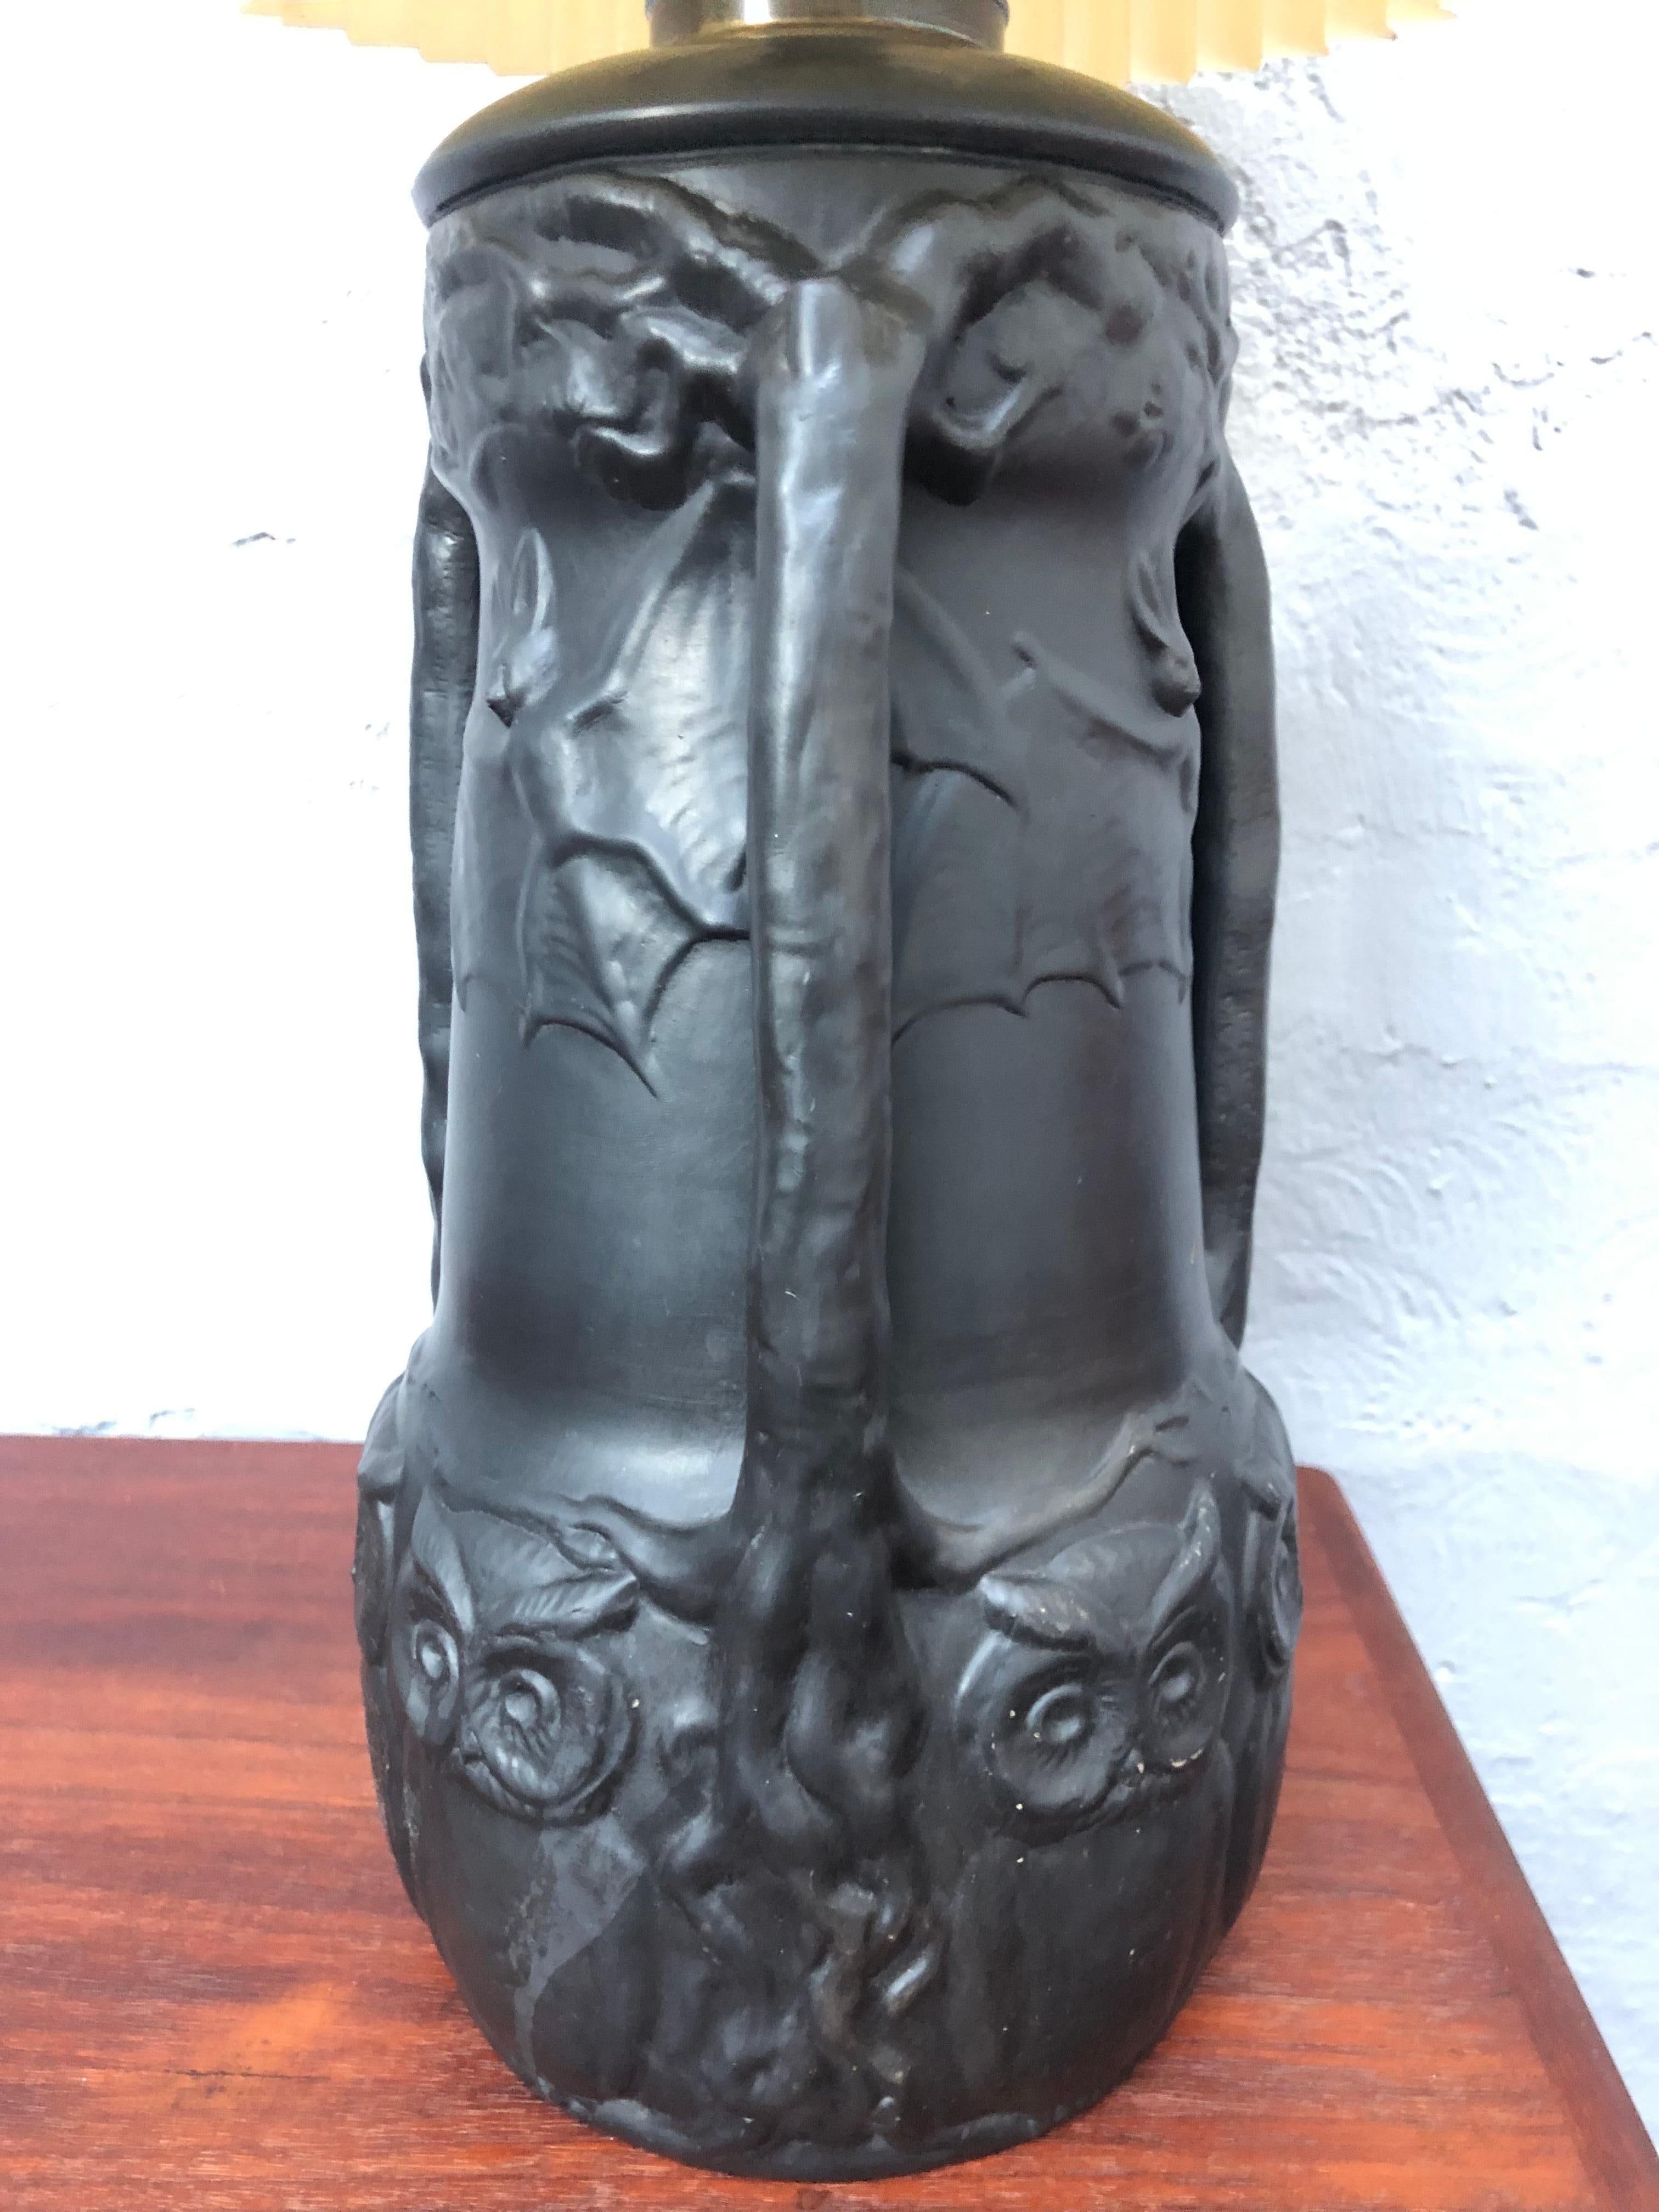 Antique Owls & Bats Black Pottery Table Lamp by L. Hjorth of Bornholm 1